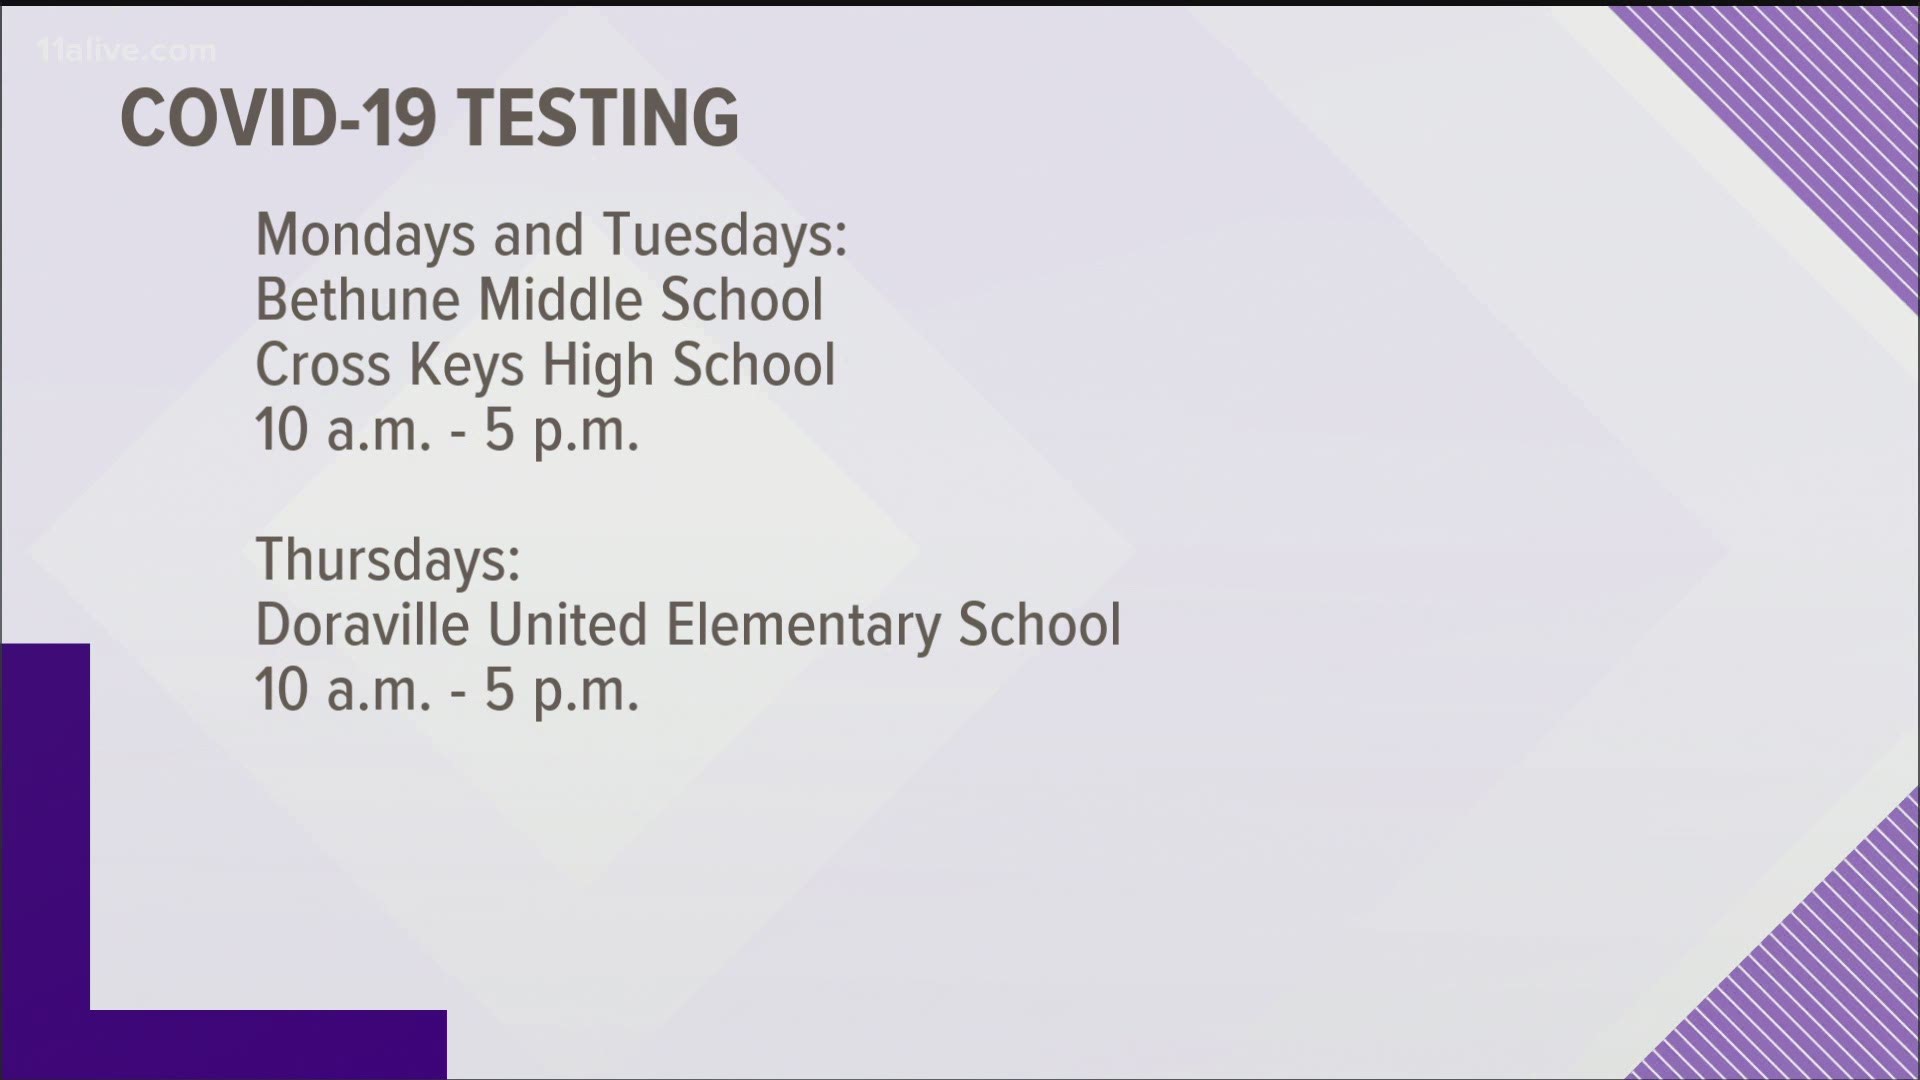 The district reports more testing locations are being considered for a future date.